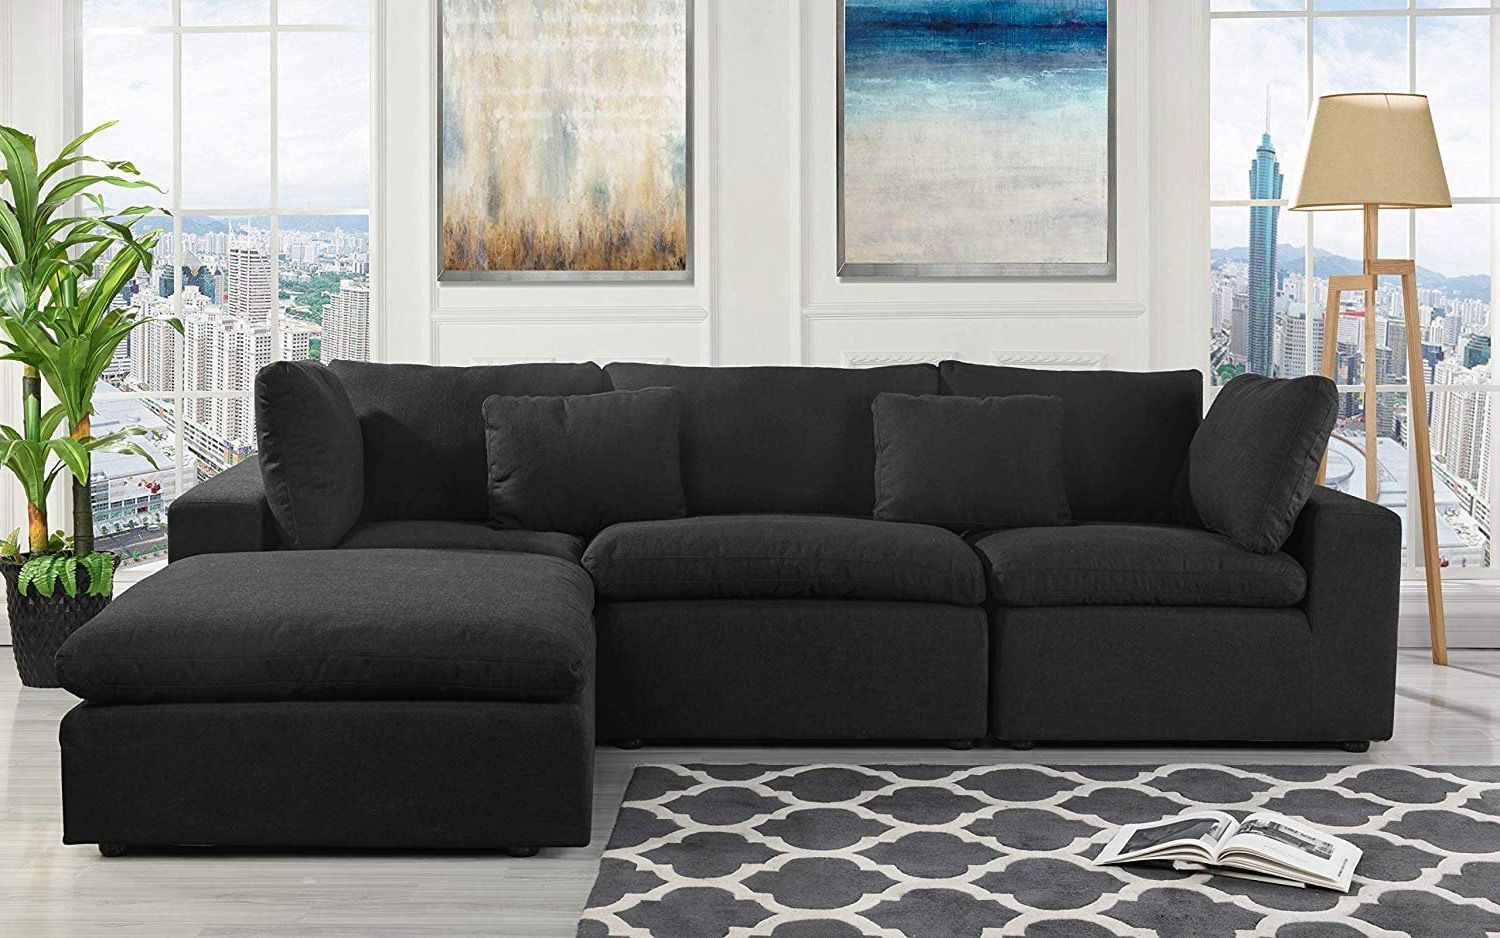 Classic Large Linen Fabric Sectional Sofa, L Shape Couch With Wide Intended For 3 Seat L Shaped Sofas In Black (View 5 of 20)